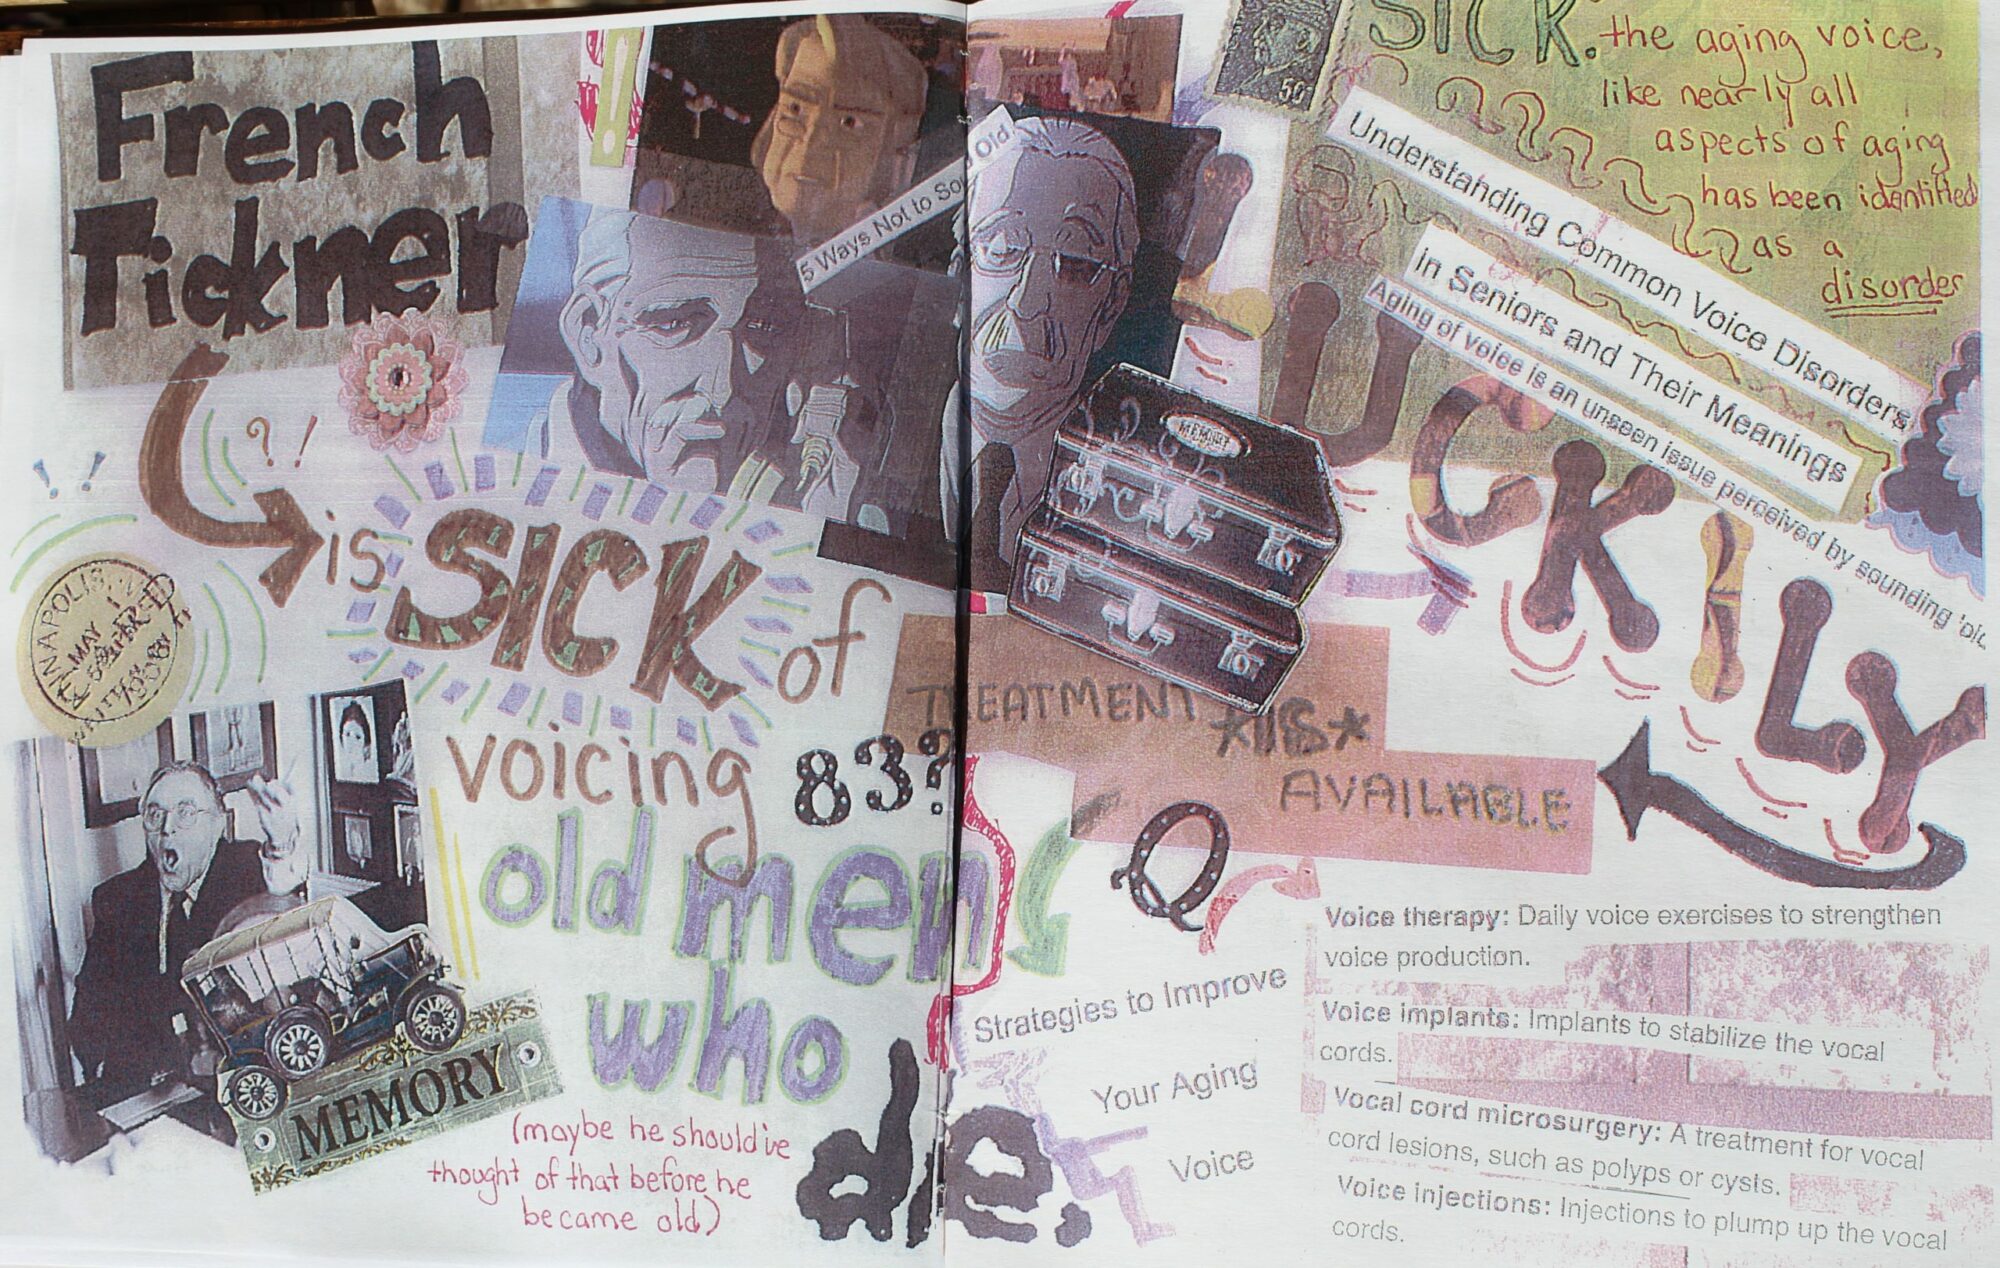 A two-page collage spread from the zine “A quick and easy guide to aging gracefully in 2714 easy steps”.